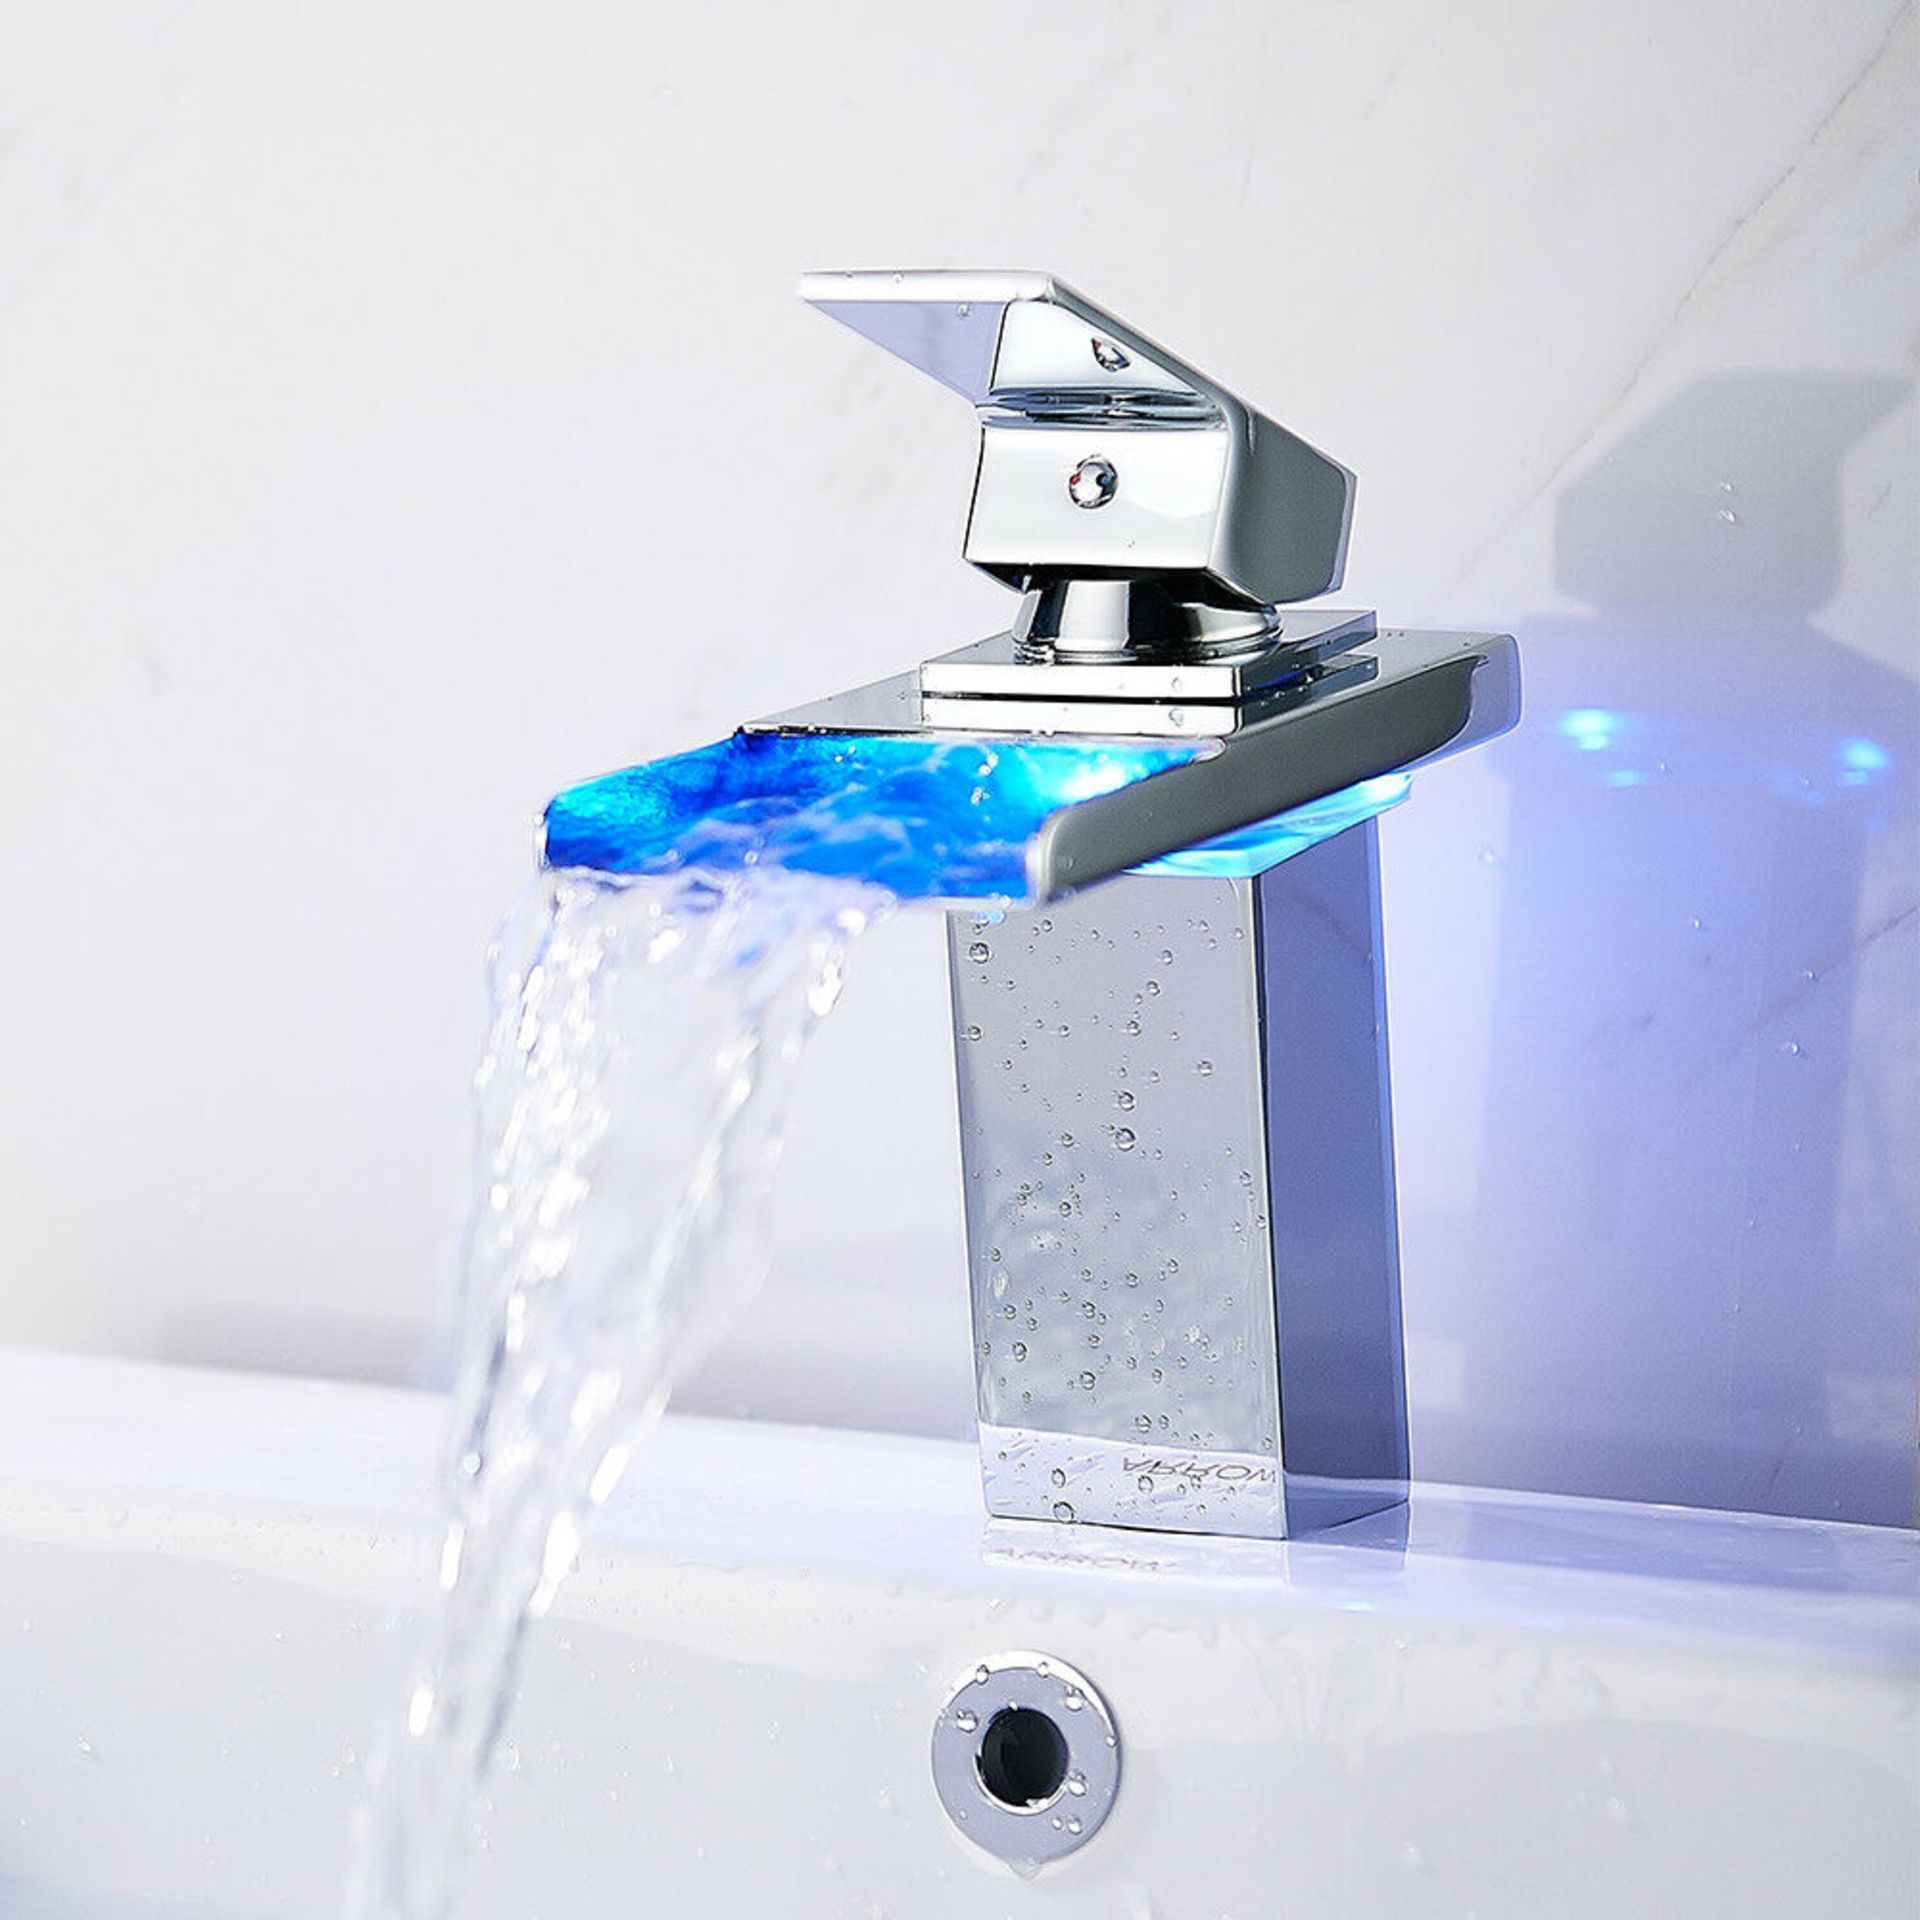 NEW & BOXED LED II RGB Bathroom Taps Waterfall Basin Mono Mixer Bath Tap Single Lever Faucet. ... - Image 2 of 3